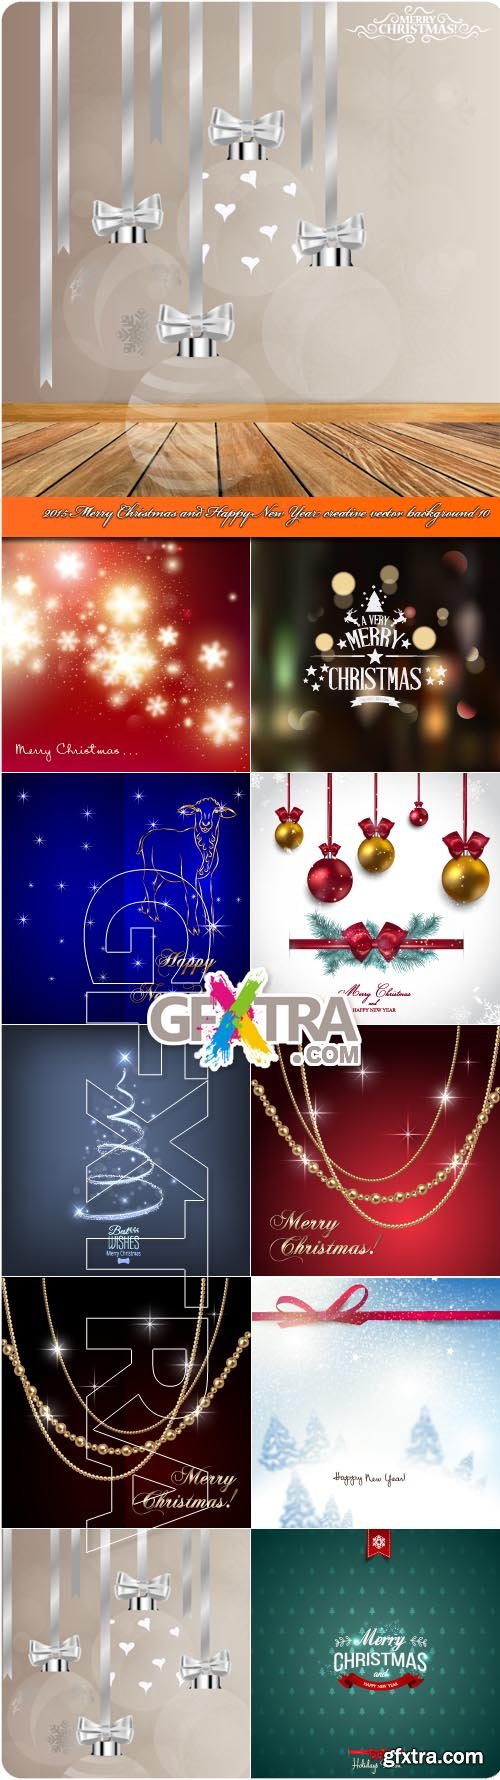 Merry Christmas and Happy New Year creative vector background 10